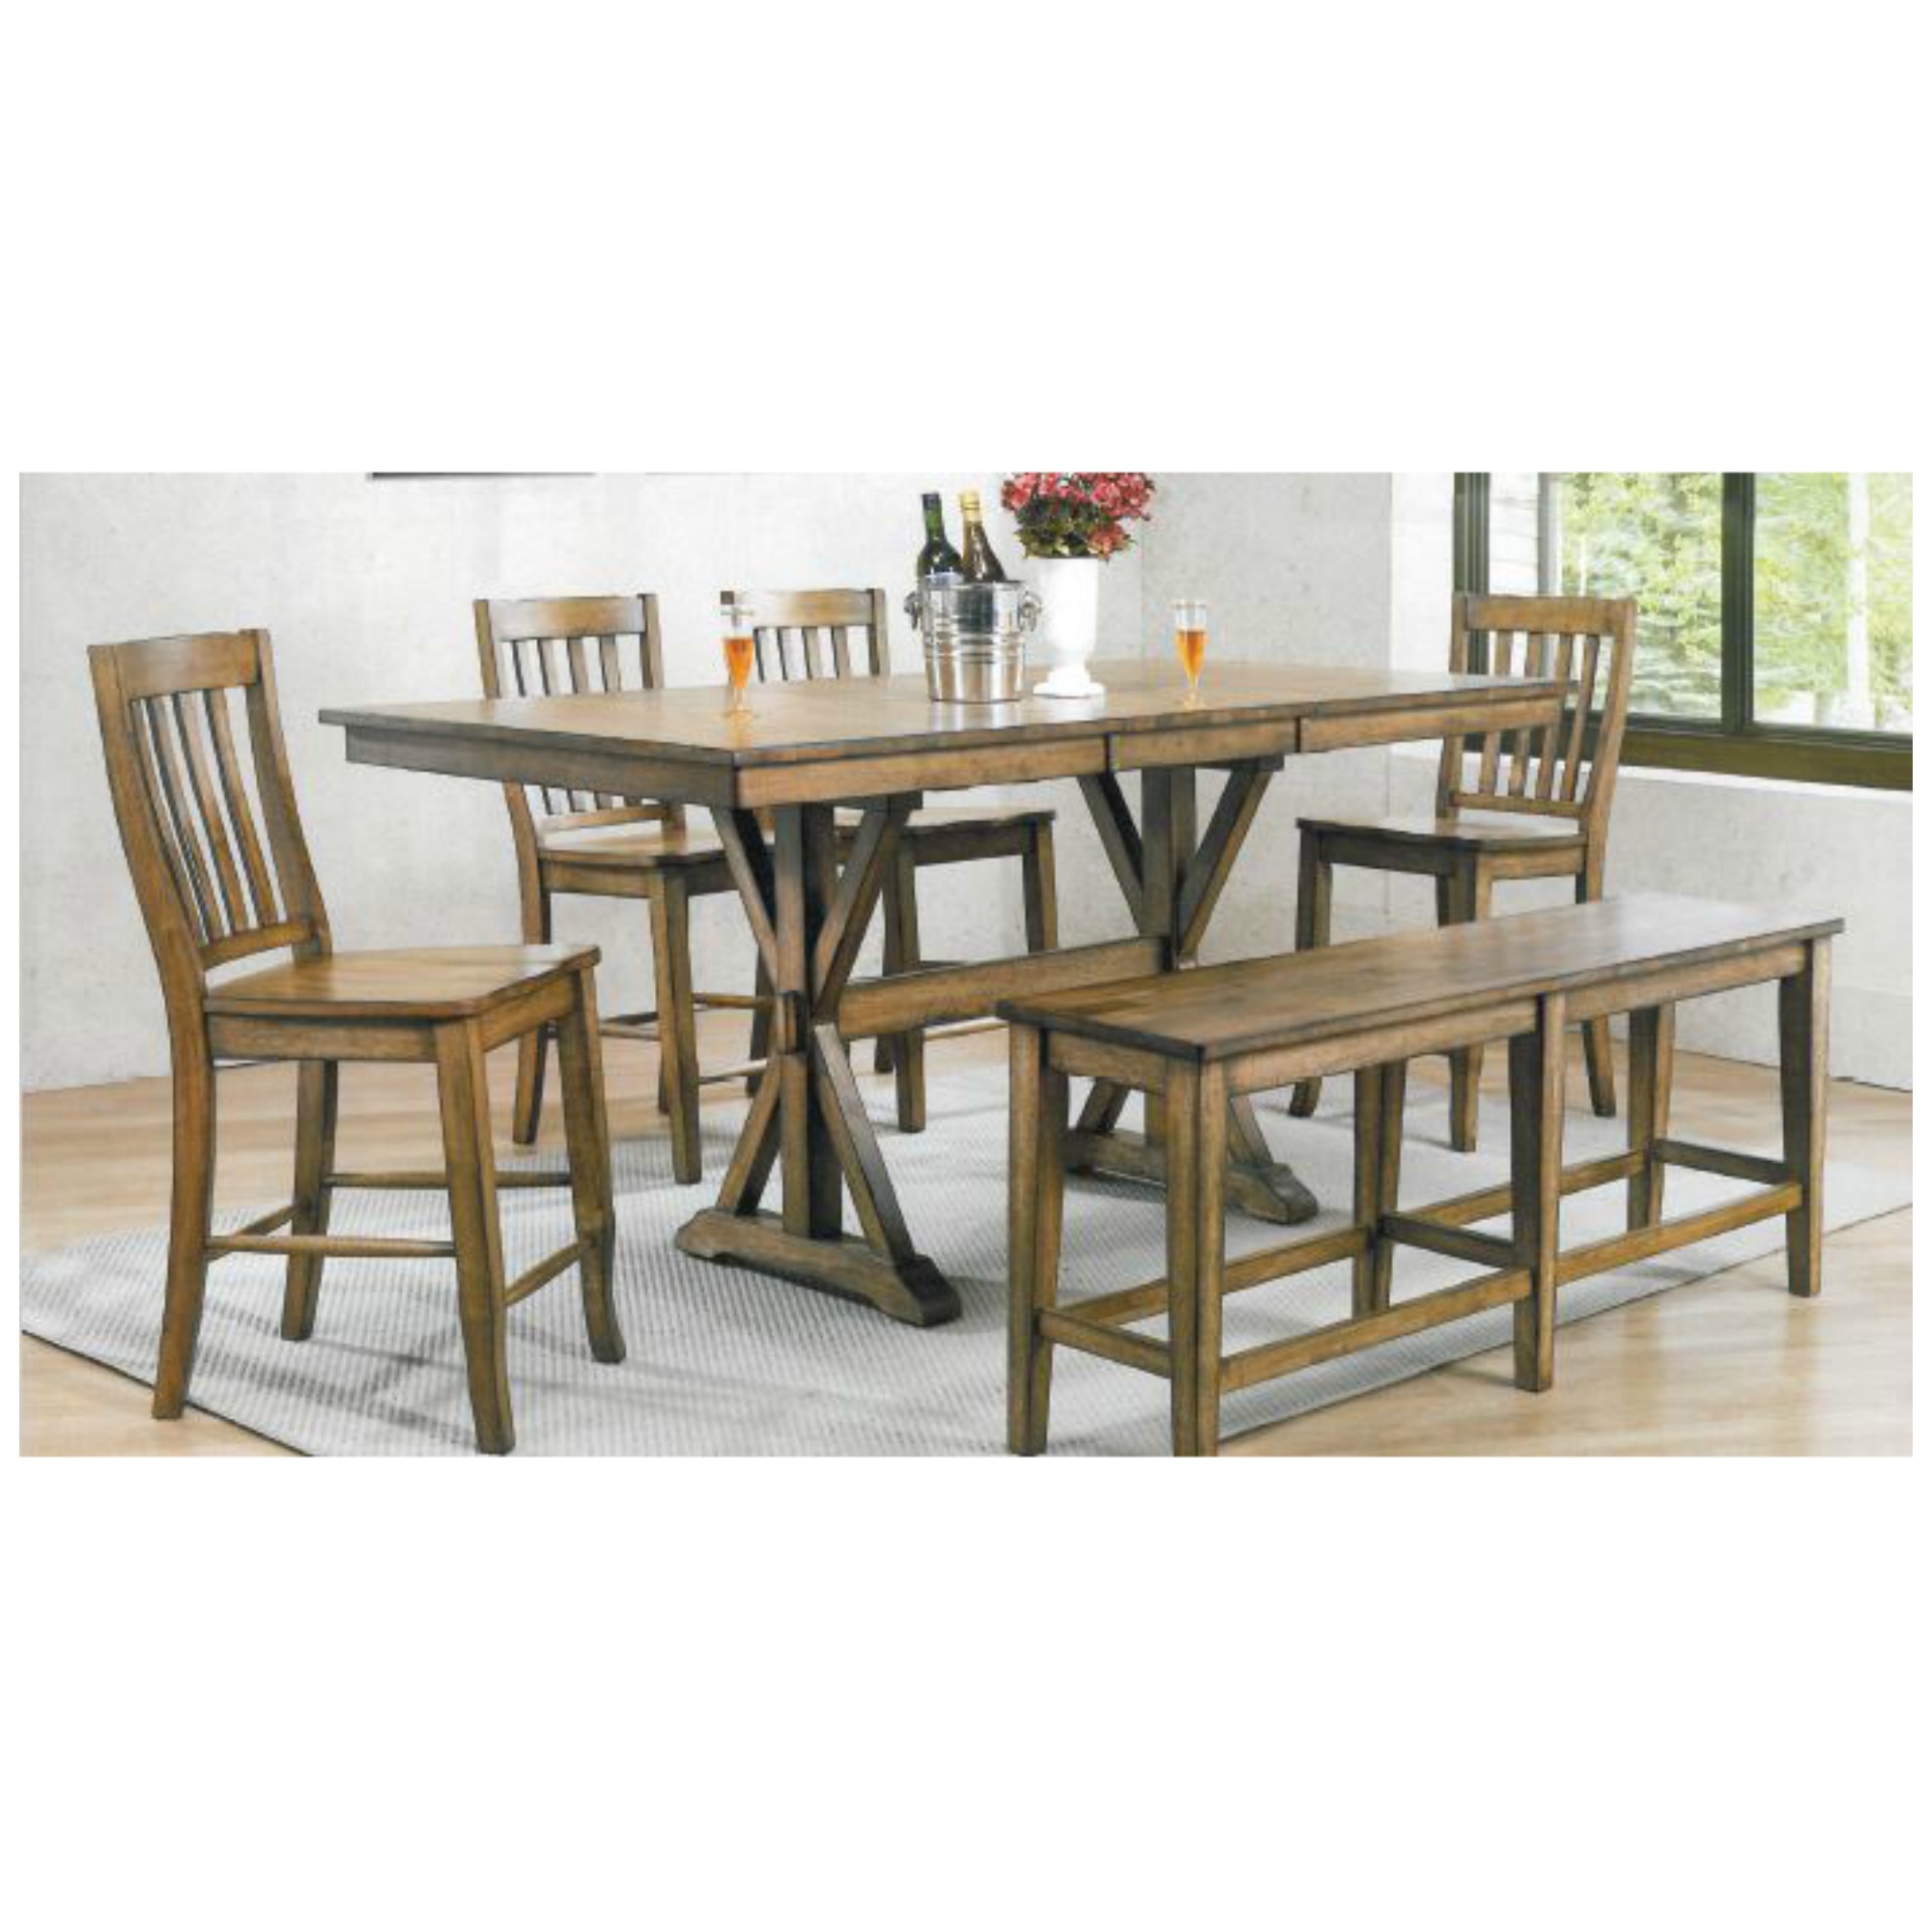 Carmel 6 Piece Tall Dining Set Rustic, How Tall Is A Counter Height Table